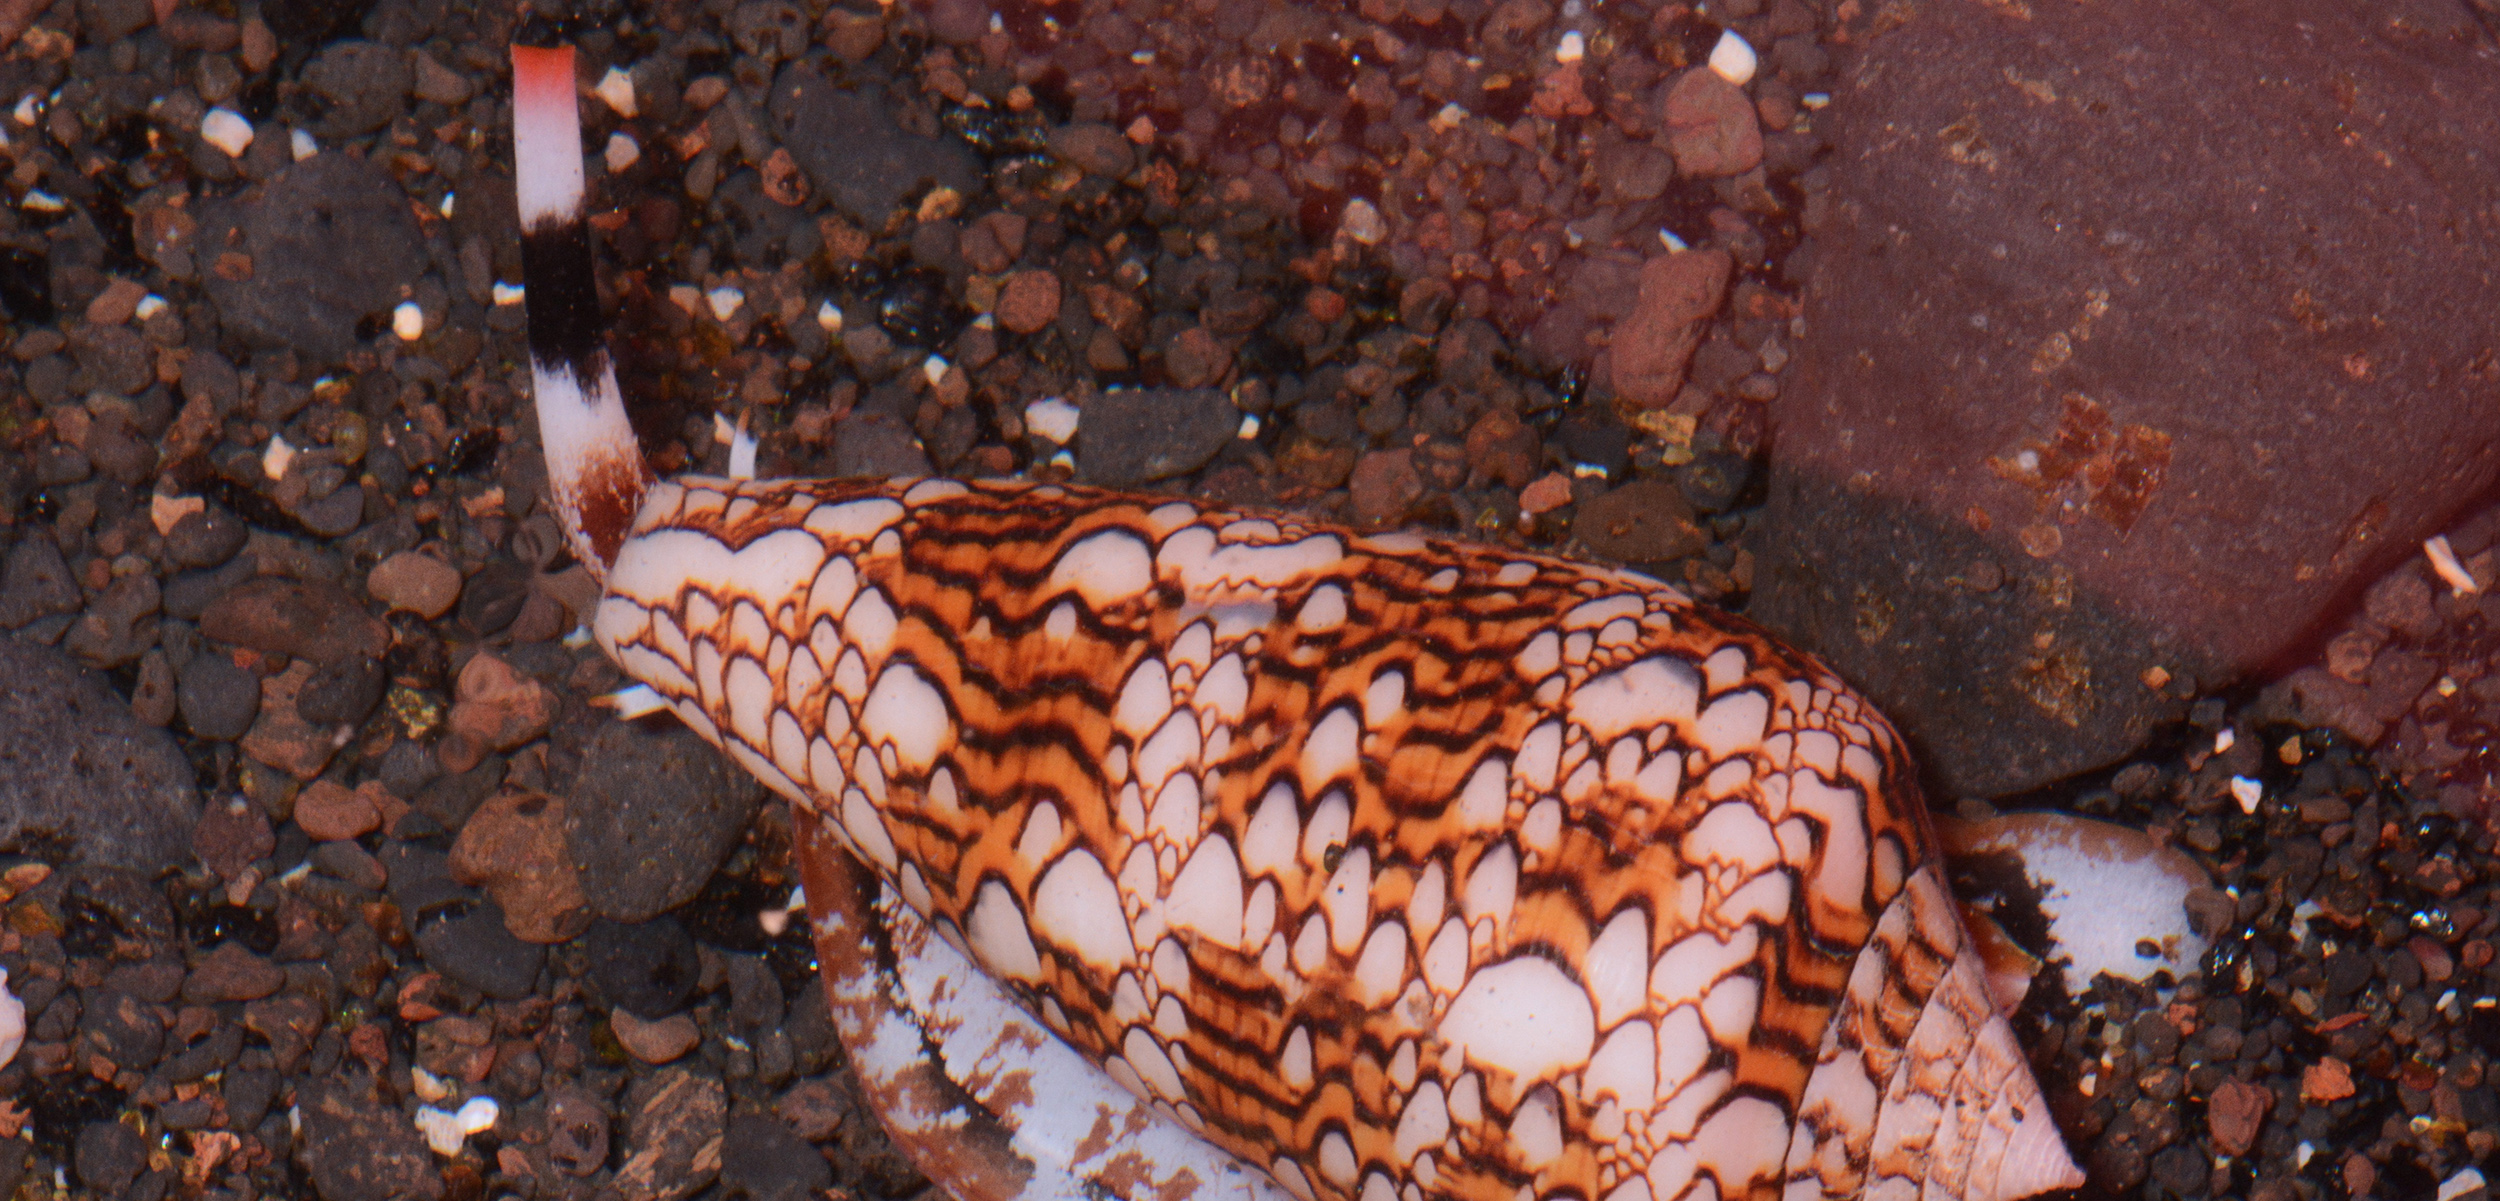 Cone snails such as the cobweb cone snail and the textile cone snail (pictured here) have become the darlings of biomedical research. Photo by David Massemin/Biosphoto/Corbis